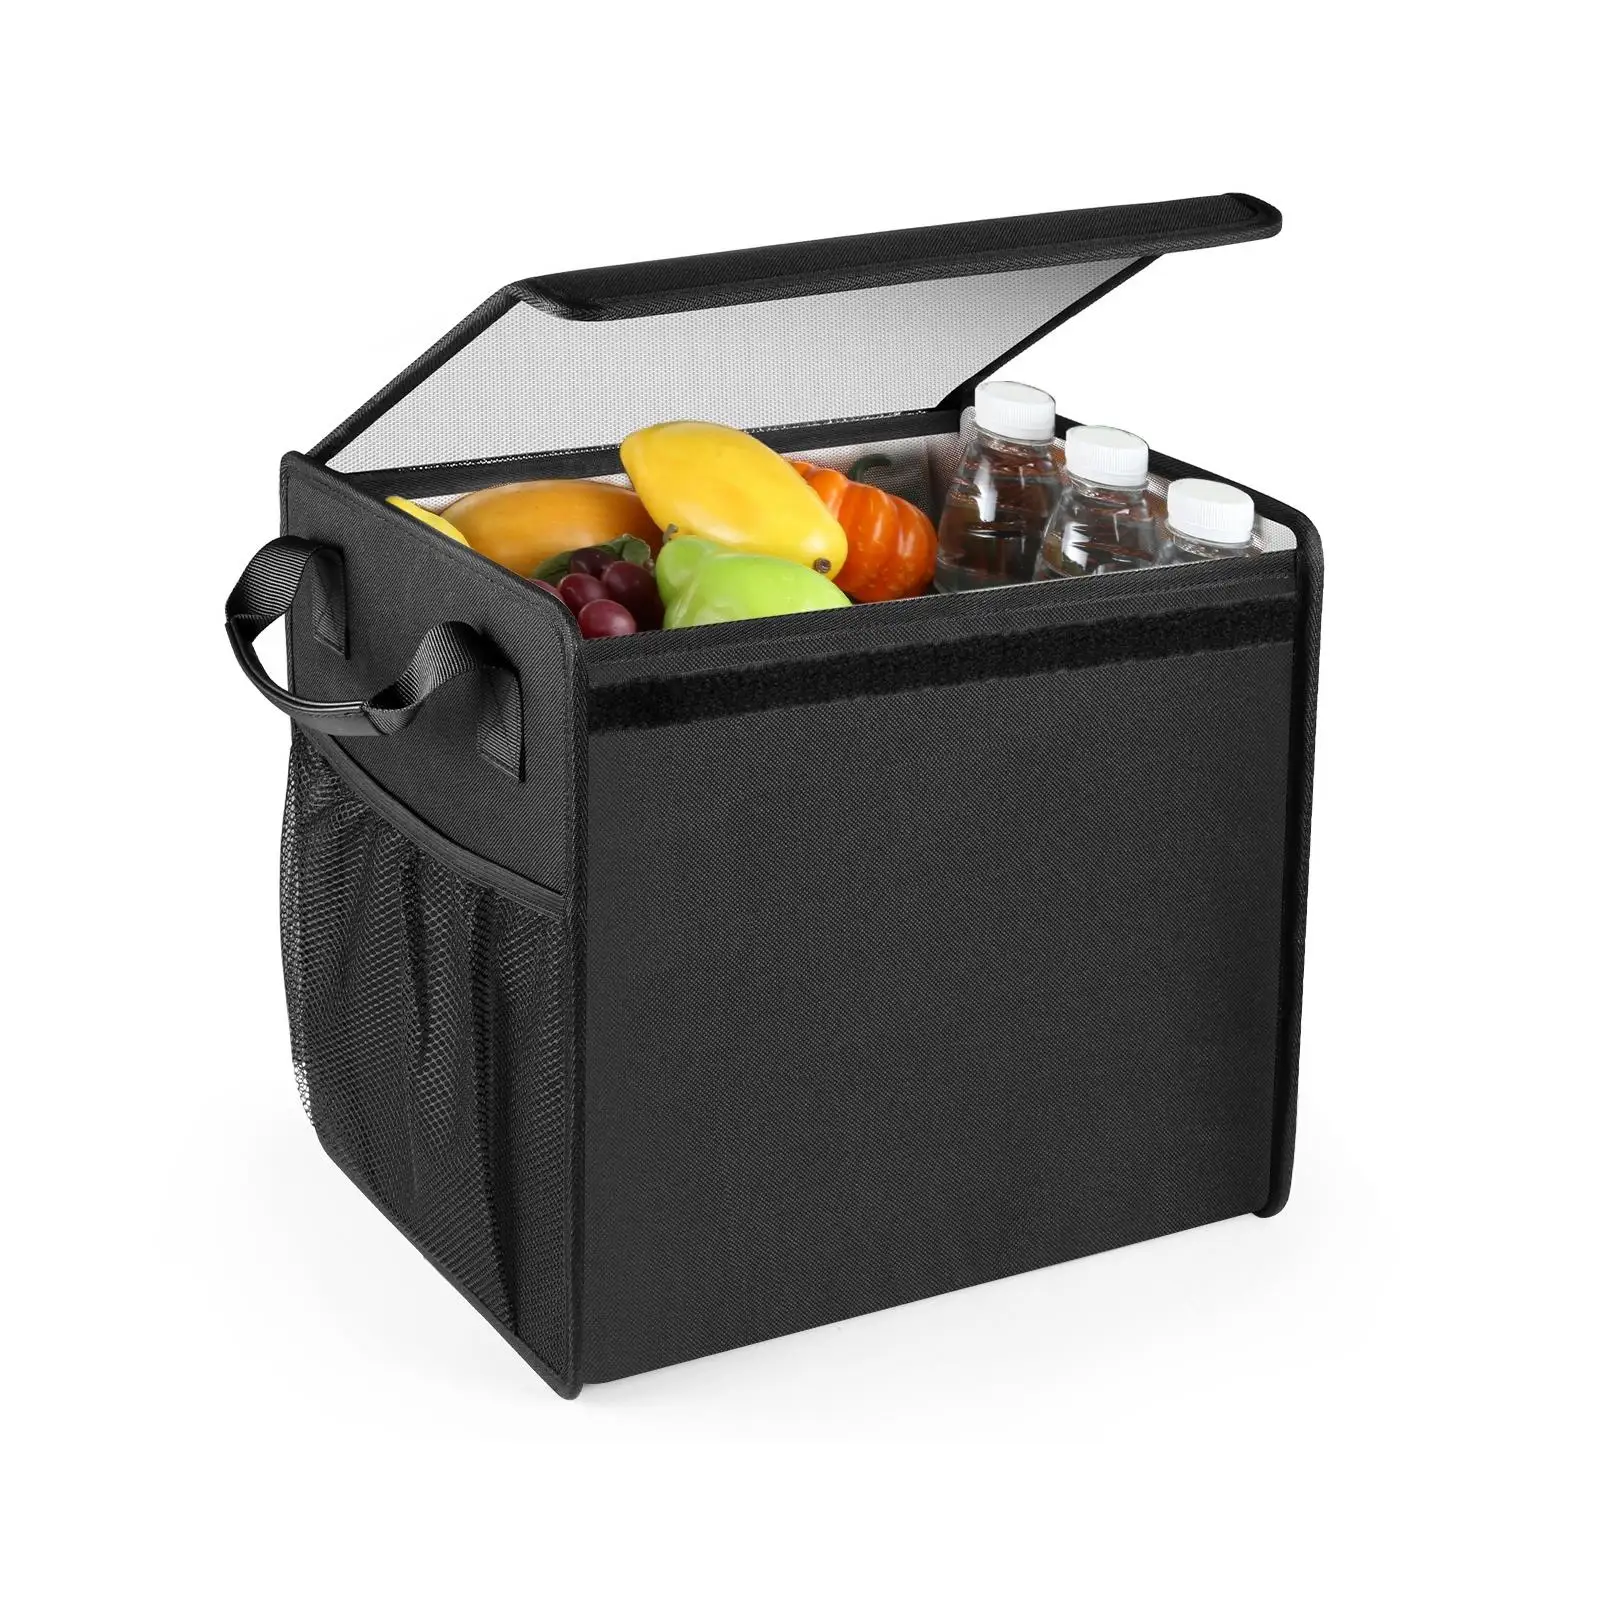 Car Trunk Organizer Bag Storage Trunk Folding Multi Function Cargo Storage Container Outdoor Camping Storage Box for SUV